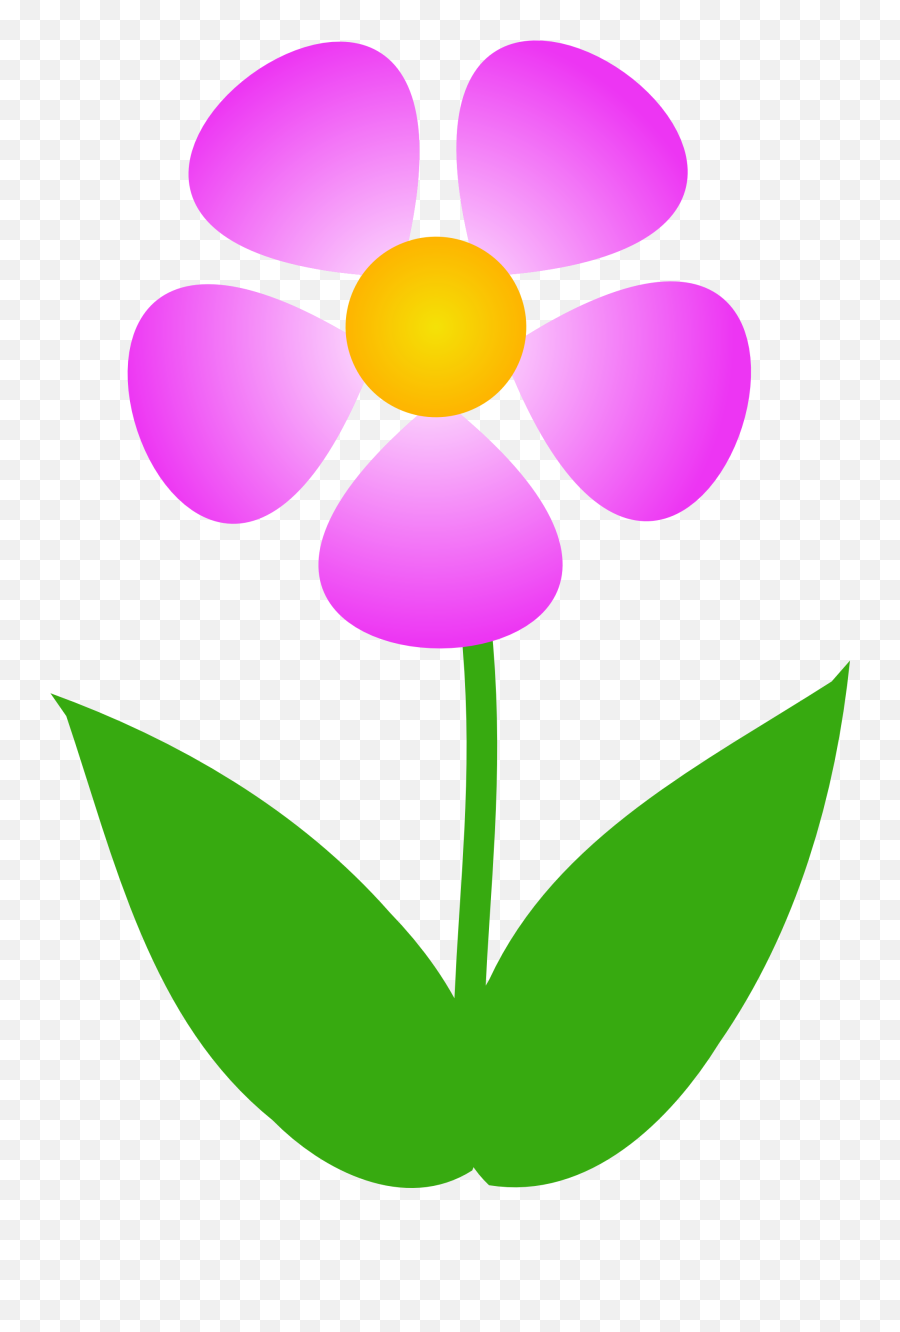 Hd Clipart - Clipartsco Pea Plants Flowers Can Be Purple P Nt 18 Plants With White Flowers And 142 Plants With Purple Flowers What Is The Value Of P Emoji,Rose Emoticon Desktop Wallpaper